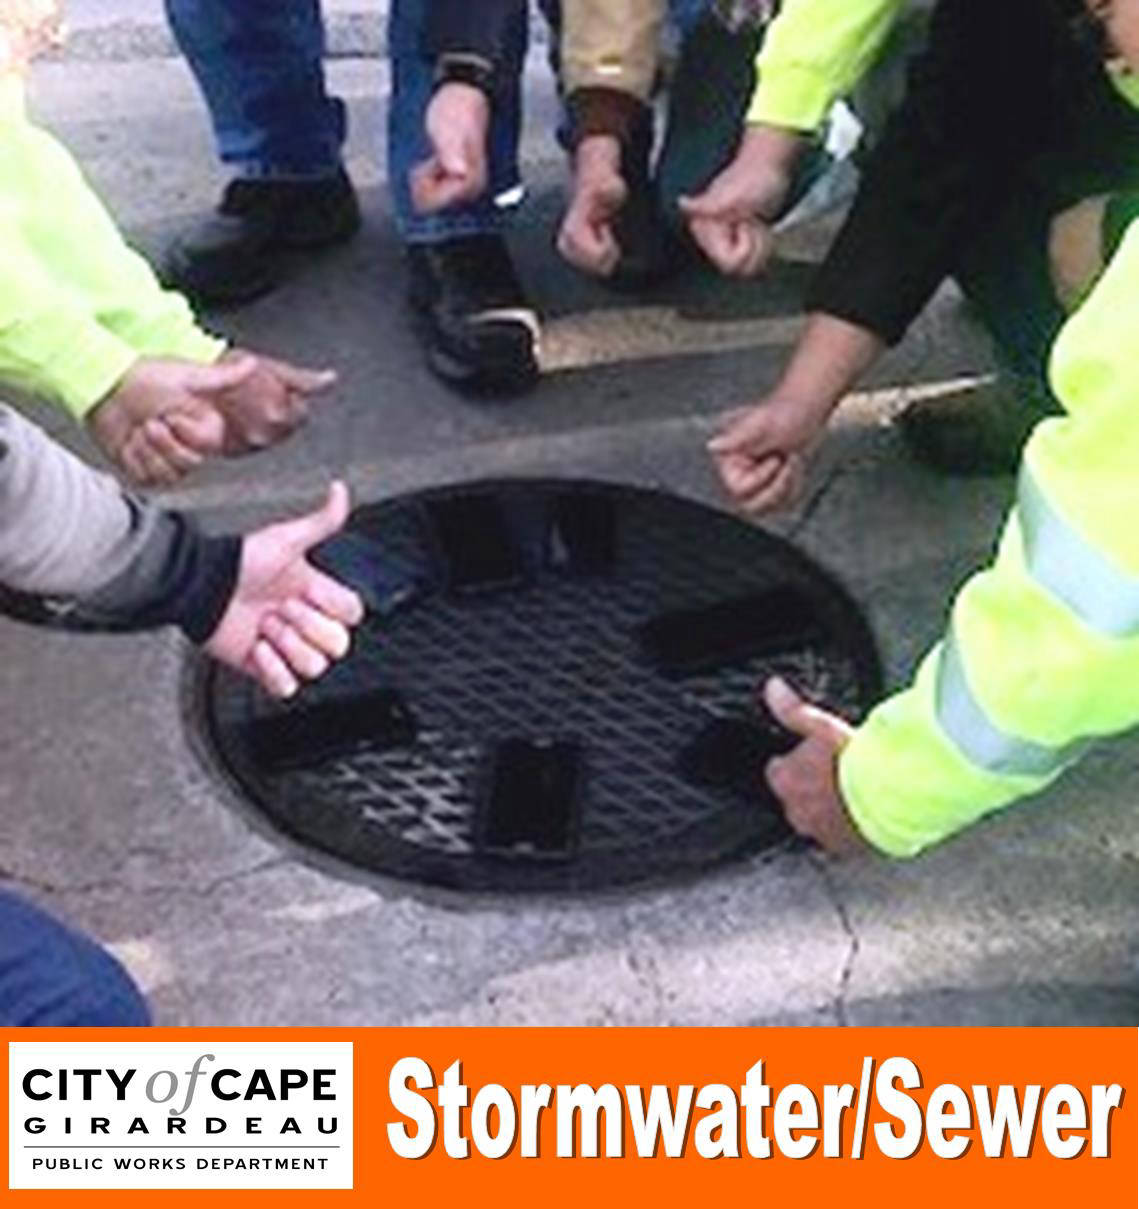 City of Cape Girardeau Public Works Dept. Stormwater/Sewer